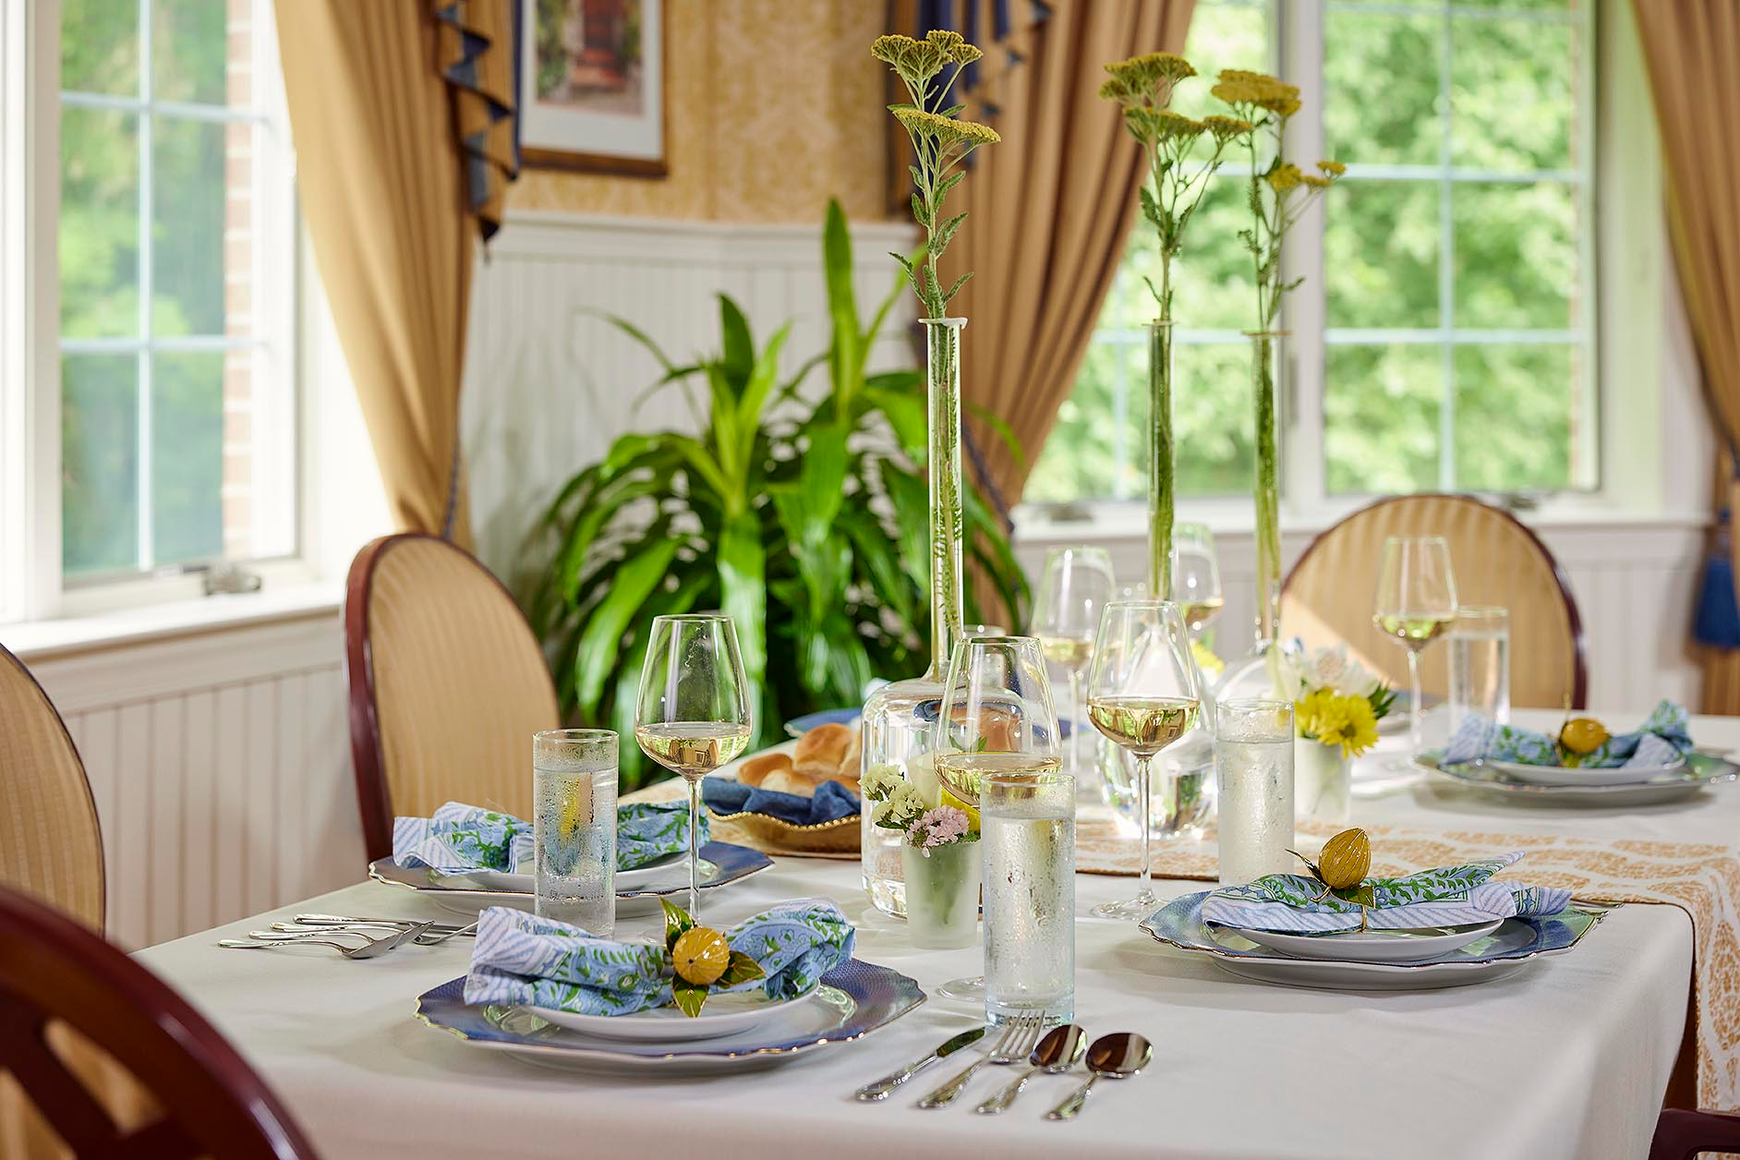 A table set with colorful linens and fresh flowers ready for lunch